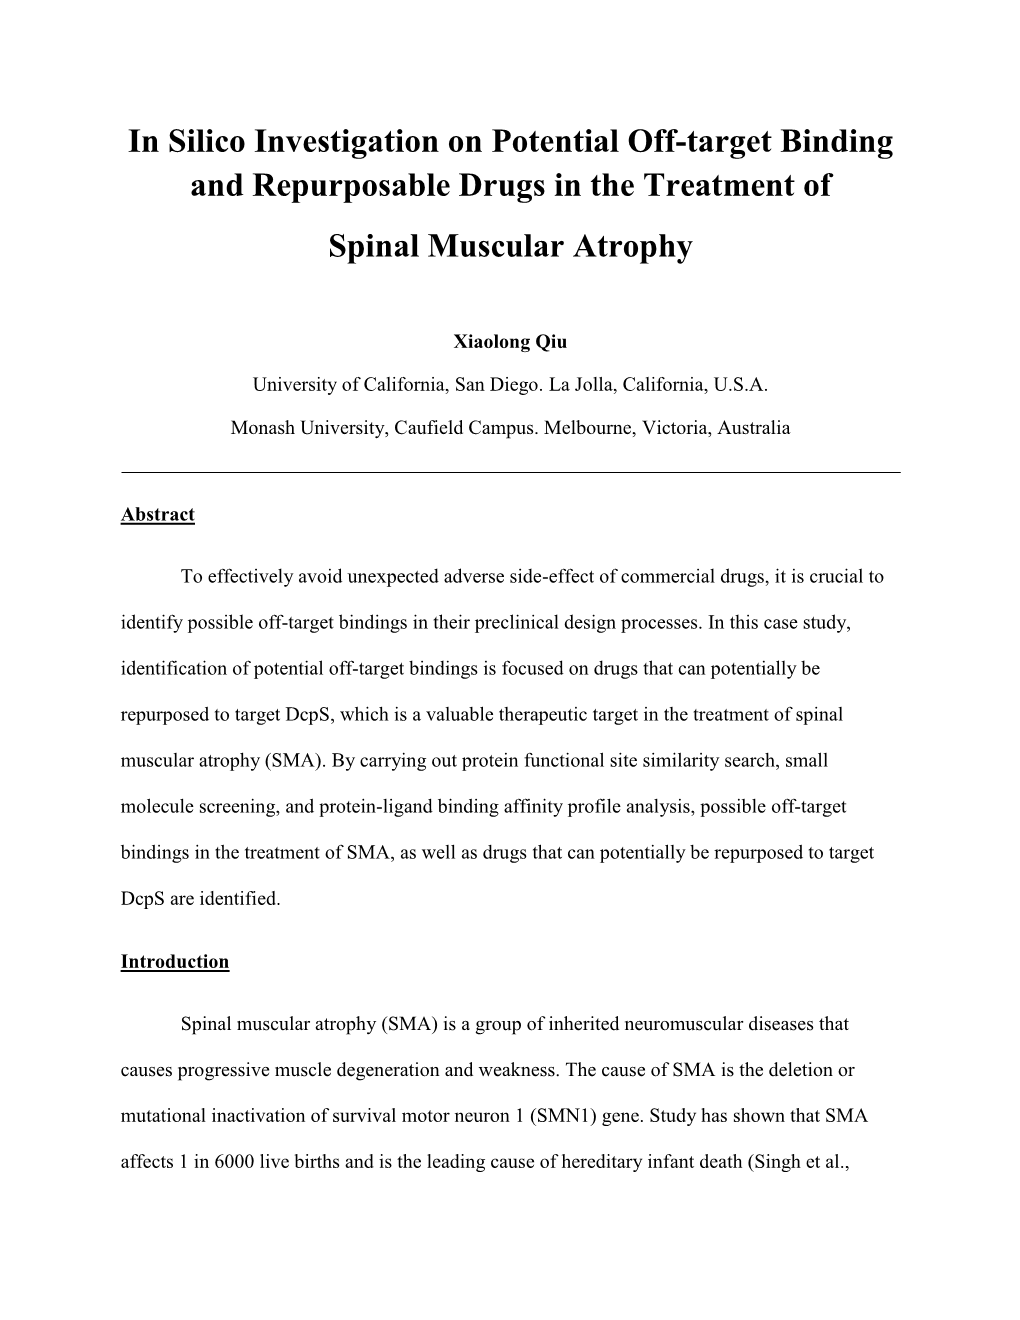 In Silico Investigation on Potential Off-Target Binding and Repurposable Drugs in the Treatment of Spinal Muscular Atrophy